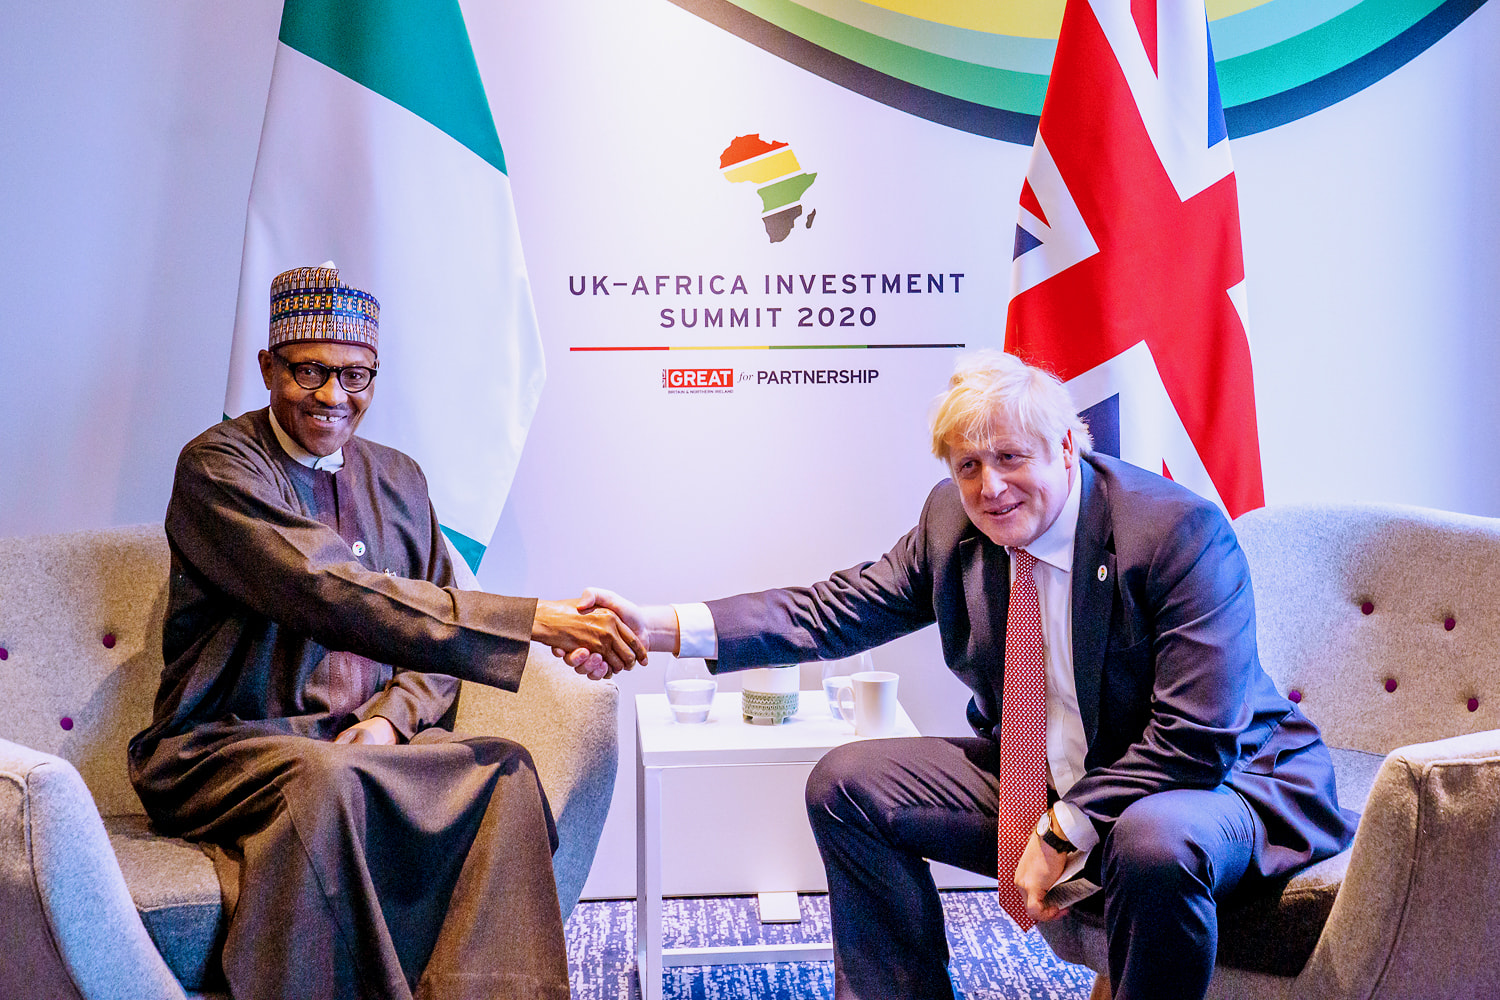 UK To Support Nigeria, Other African Countries With £127 million